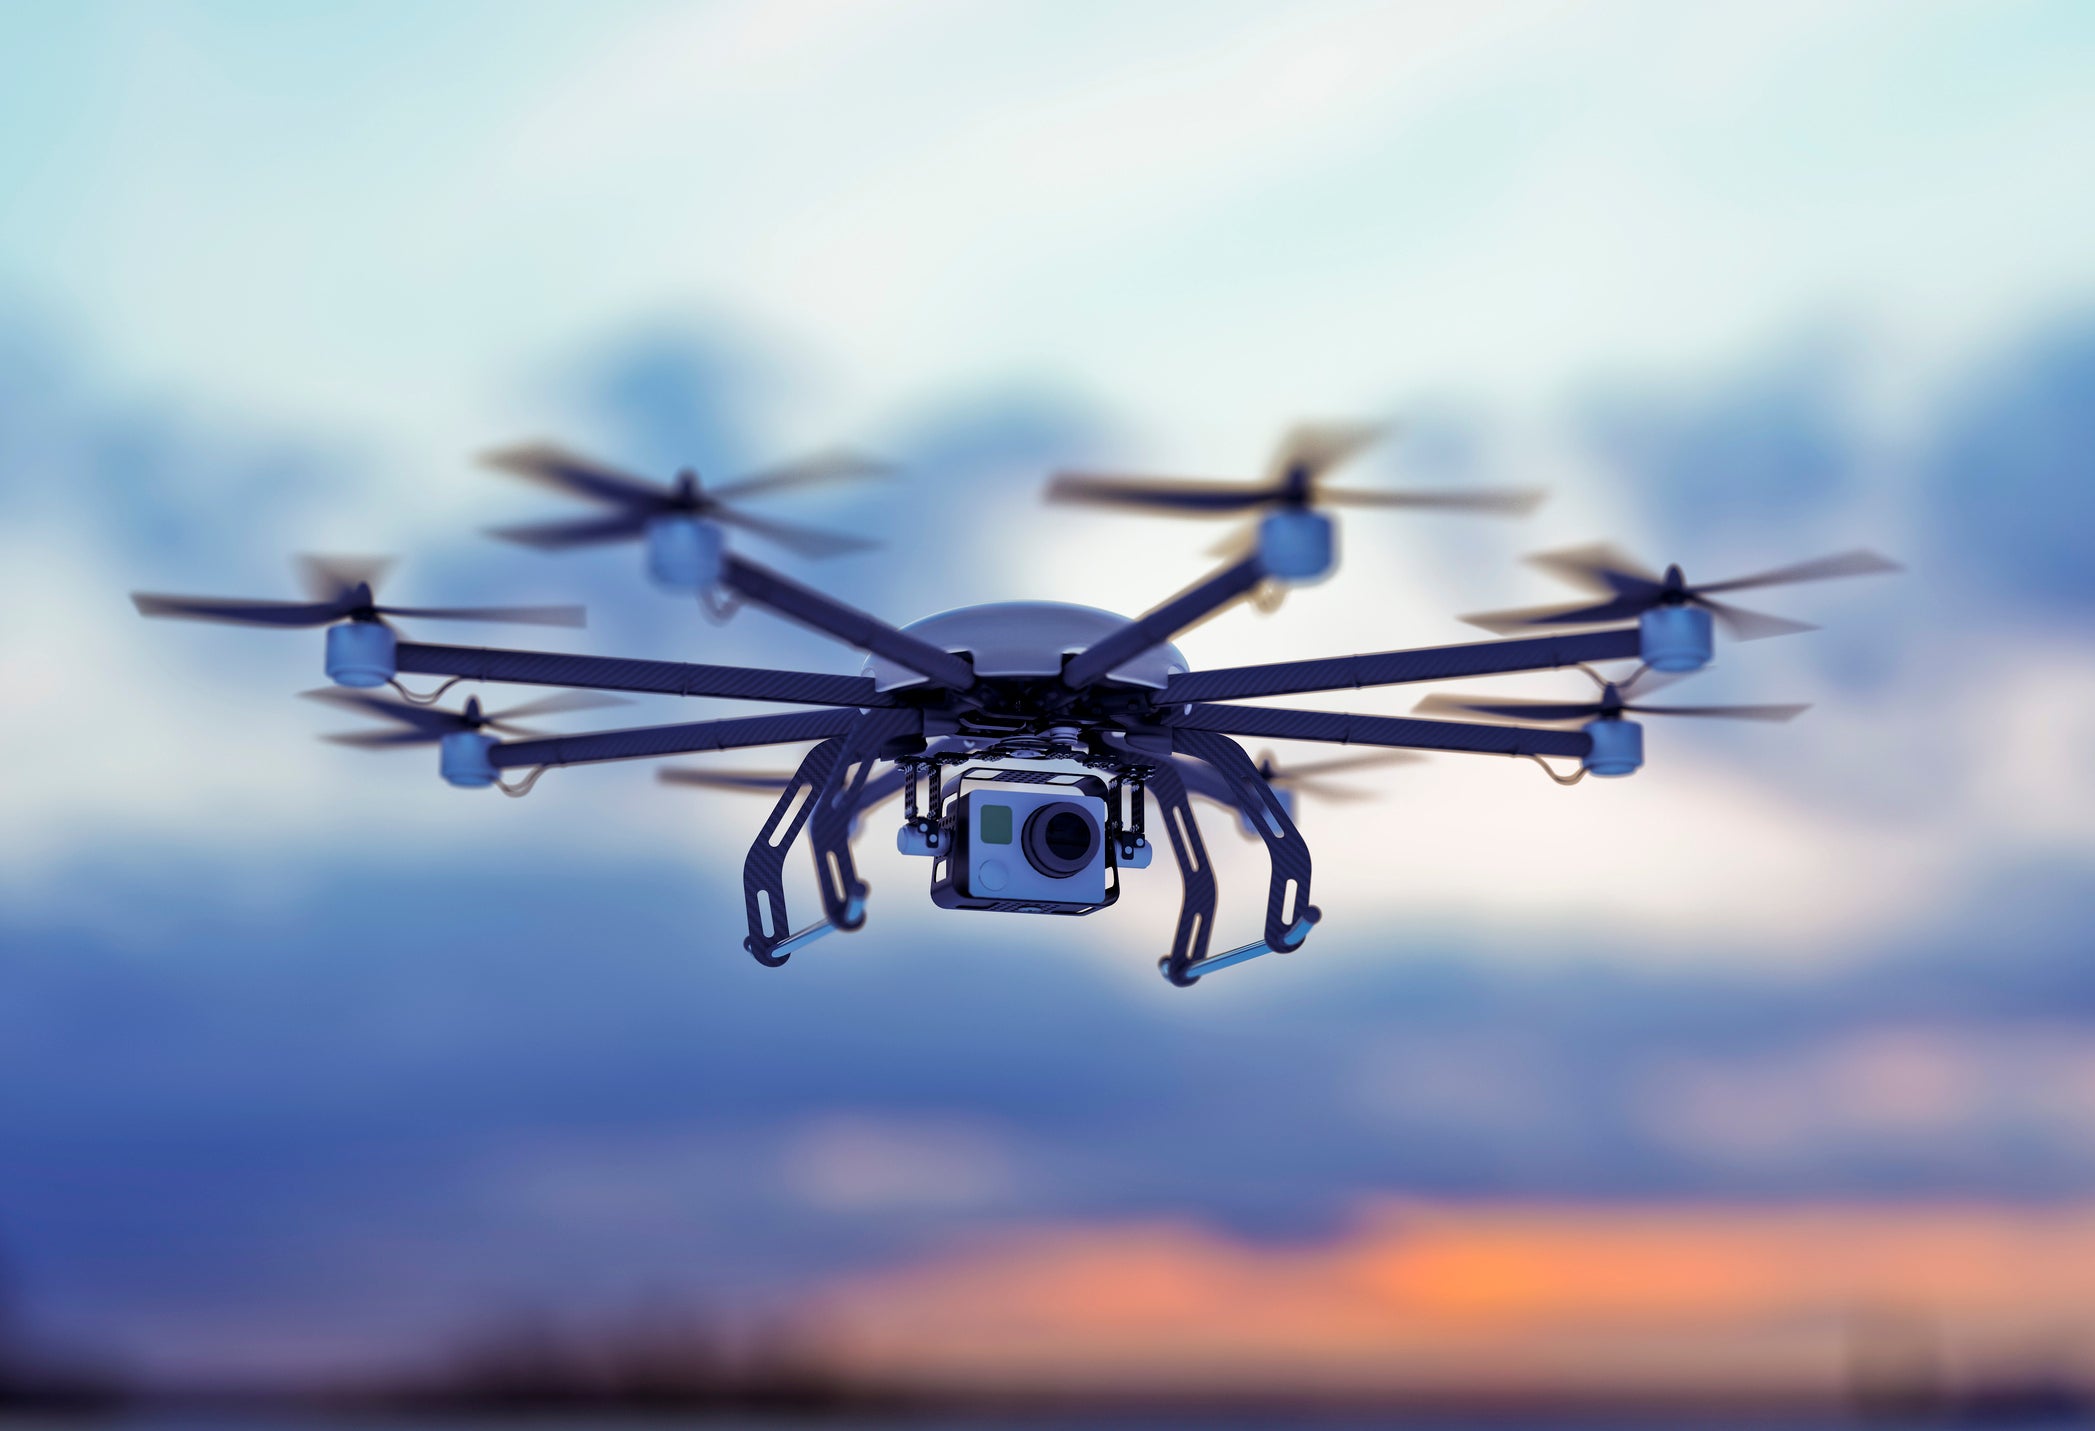 Coronavirus: Drone patrol to enforce social distancing is scrapped over privacy concerns